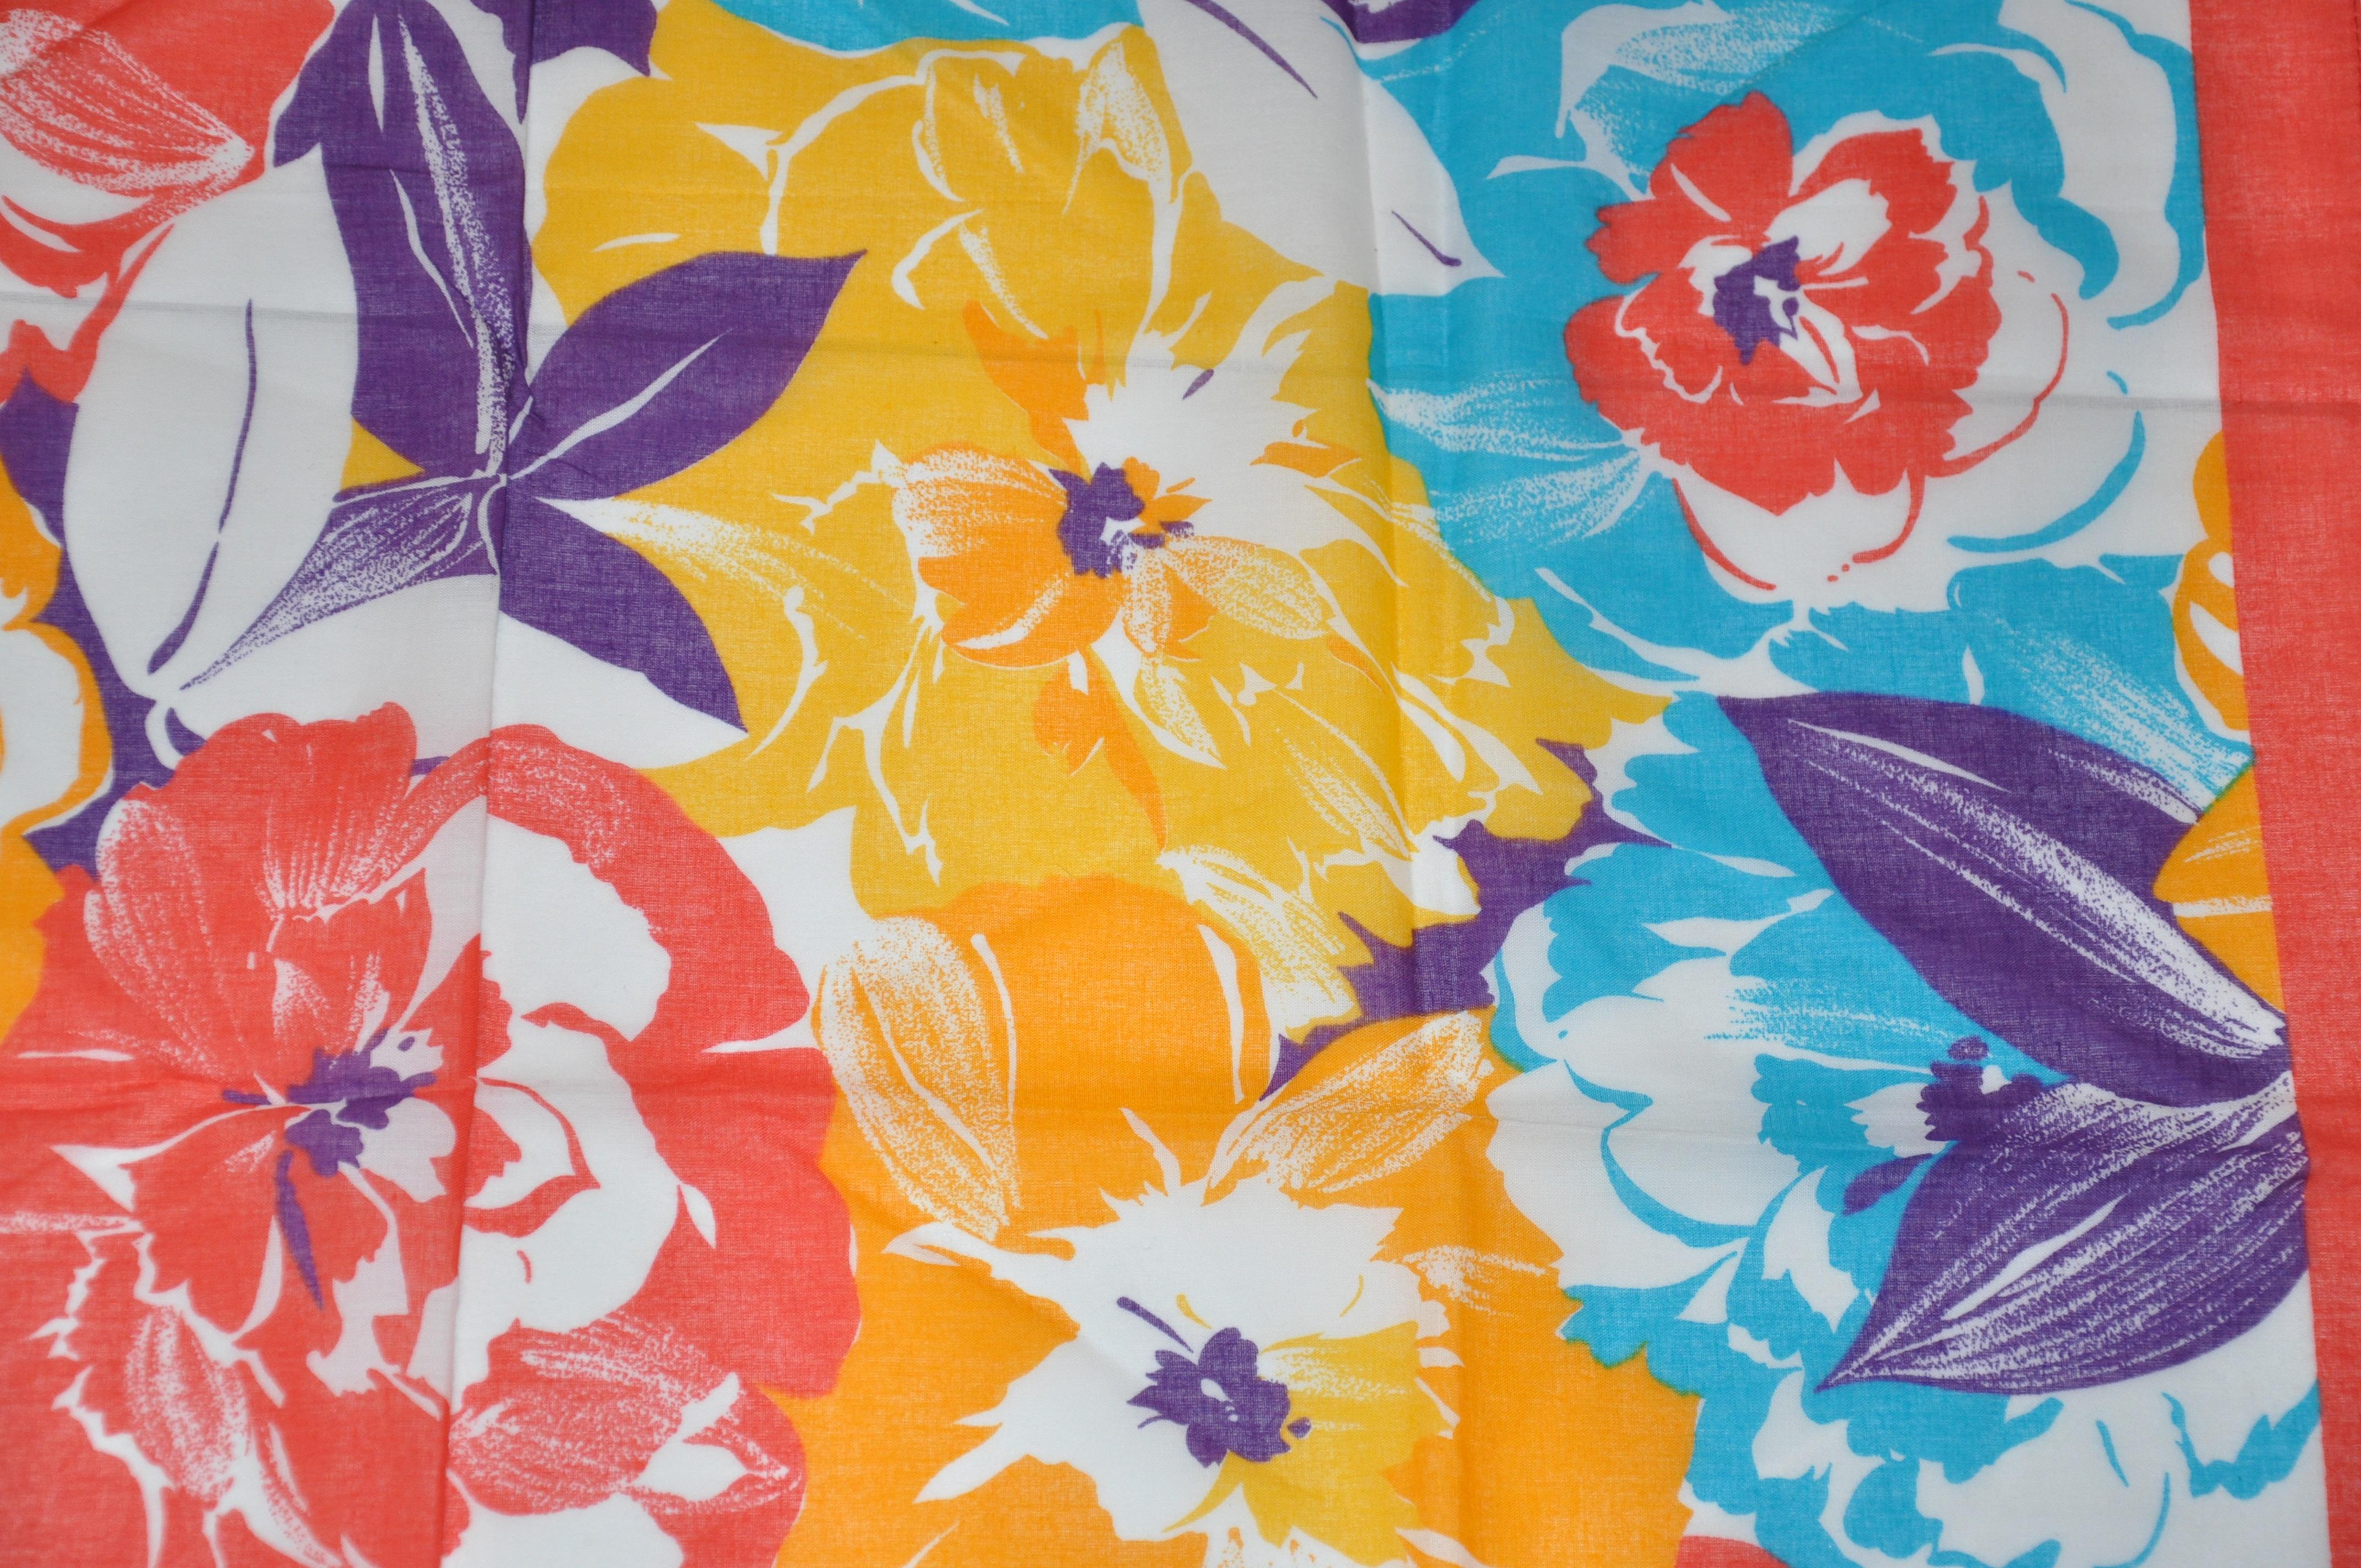        Honey wonderfully bold and vivid multi-color of Multi Florals cotton scarf measures 30 inches by 30 inches, with micro-stitched edges. Made in Italy.